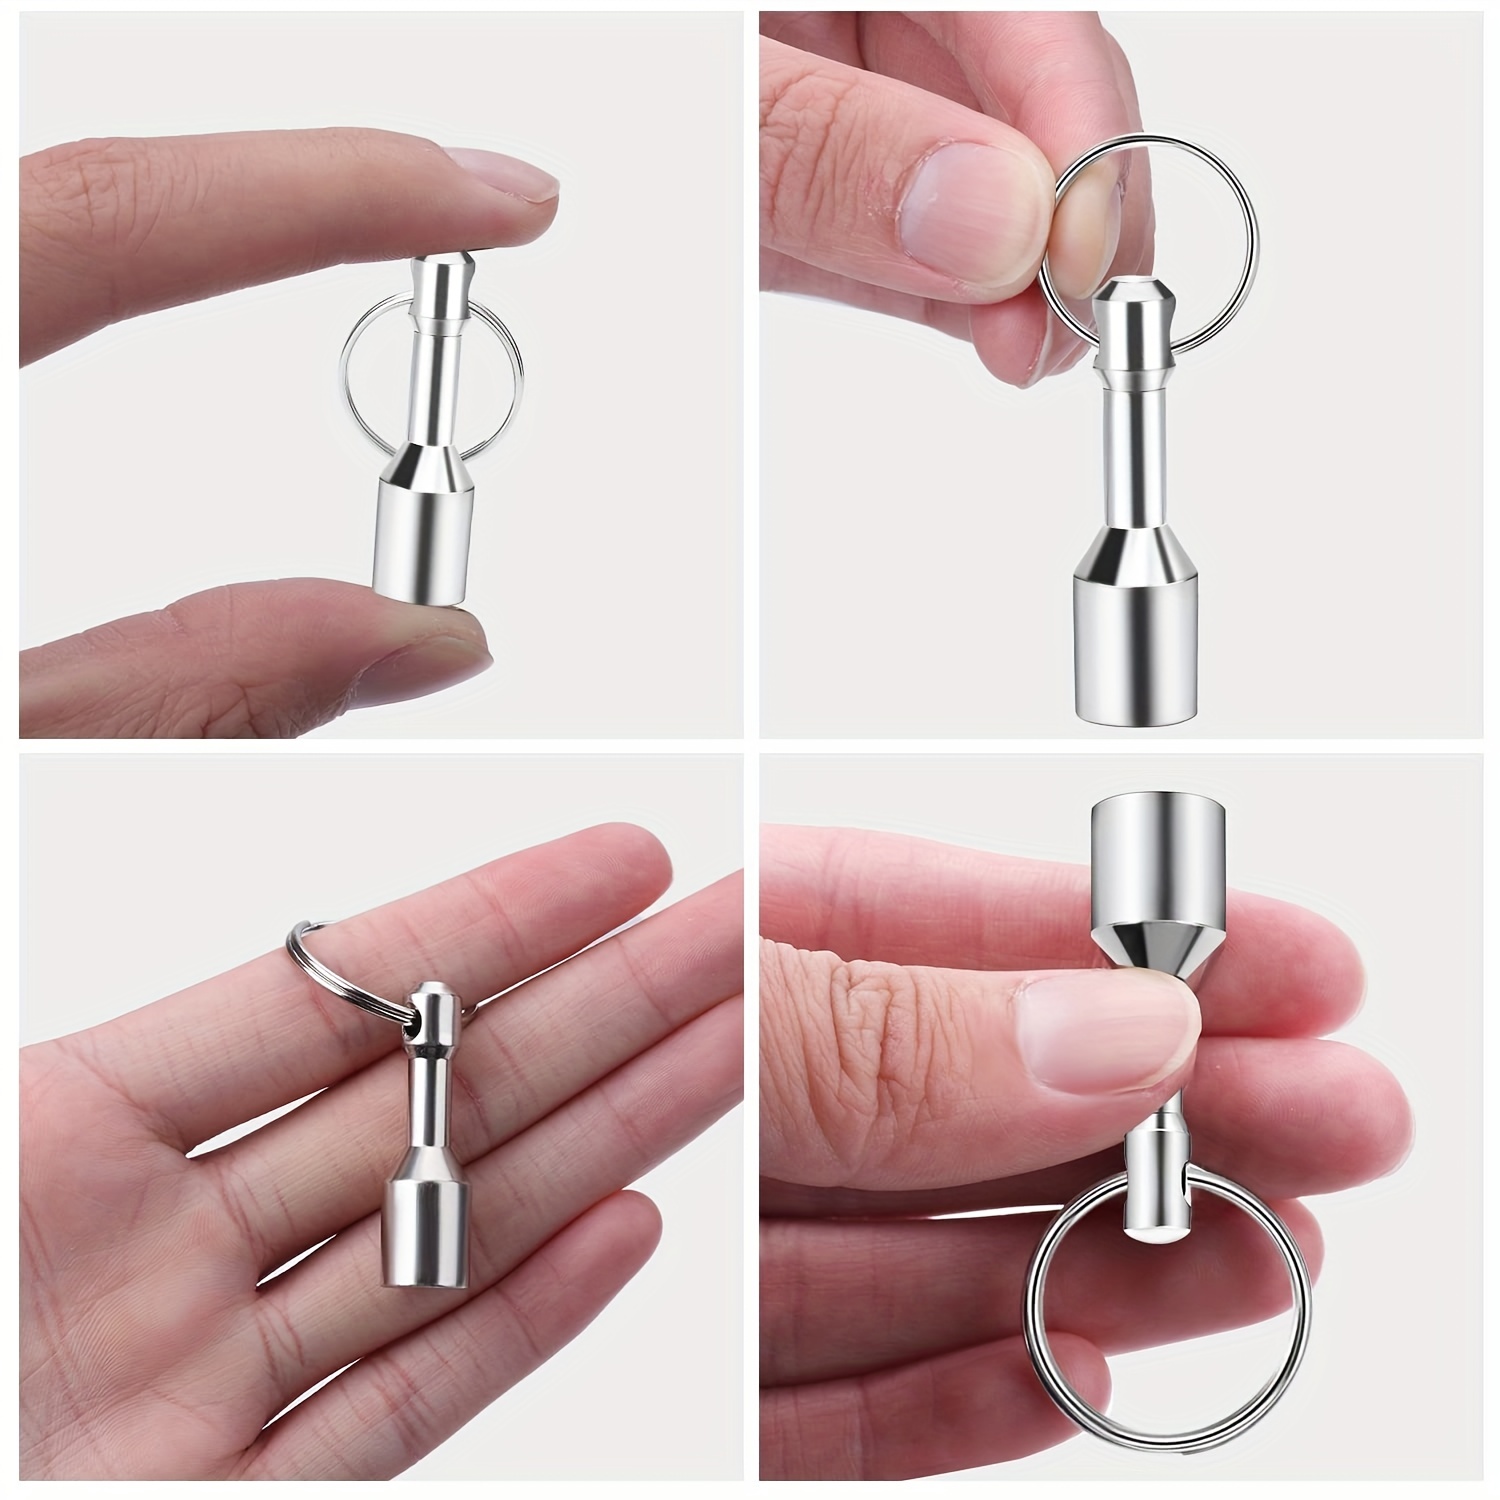 1* Keychain Magnet for Testing Brass,Gold,Silver,Ferrous Metals and Hanging  Key